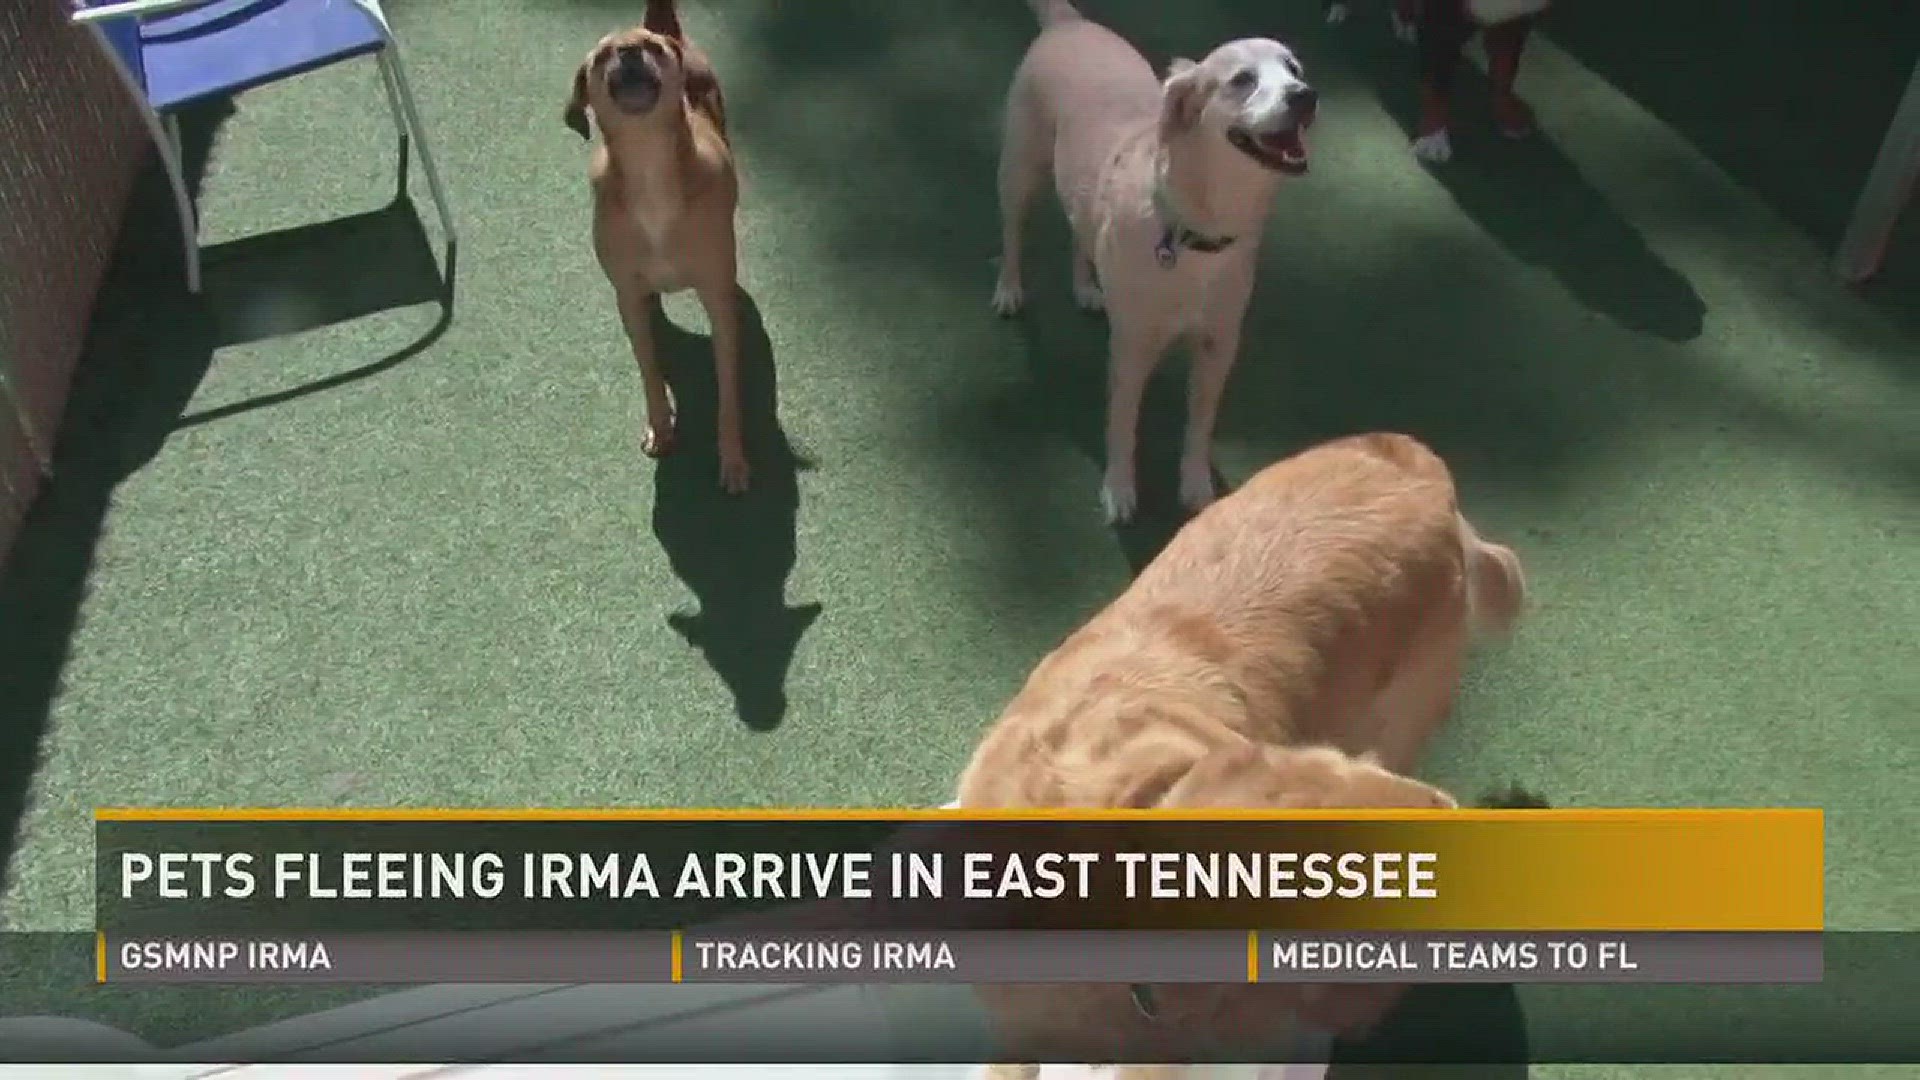 As thousands flee from the path of Hurricane Irma, animal centers in East Tennessee prepare for animals to arrive.